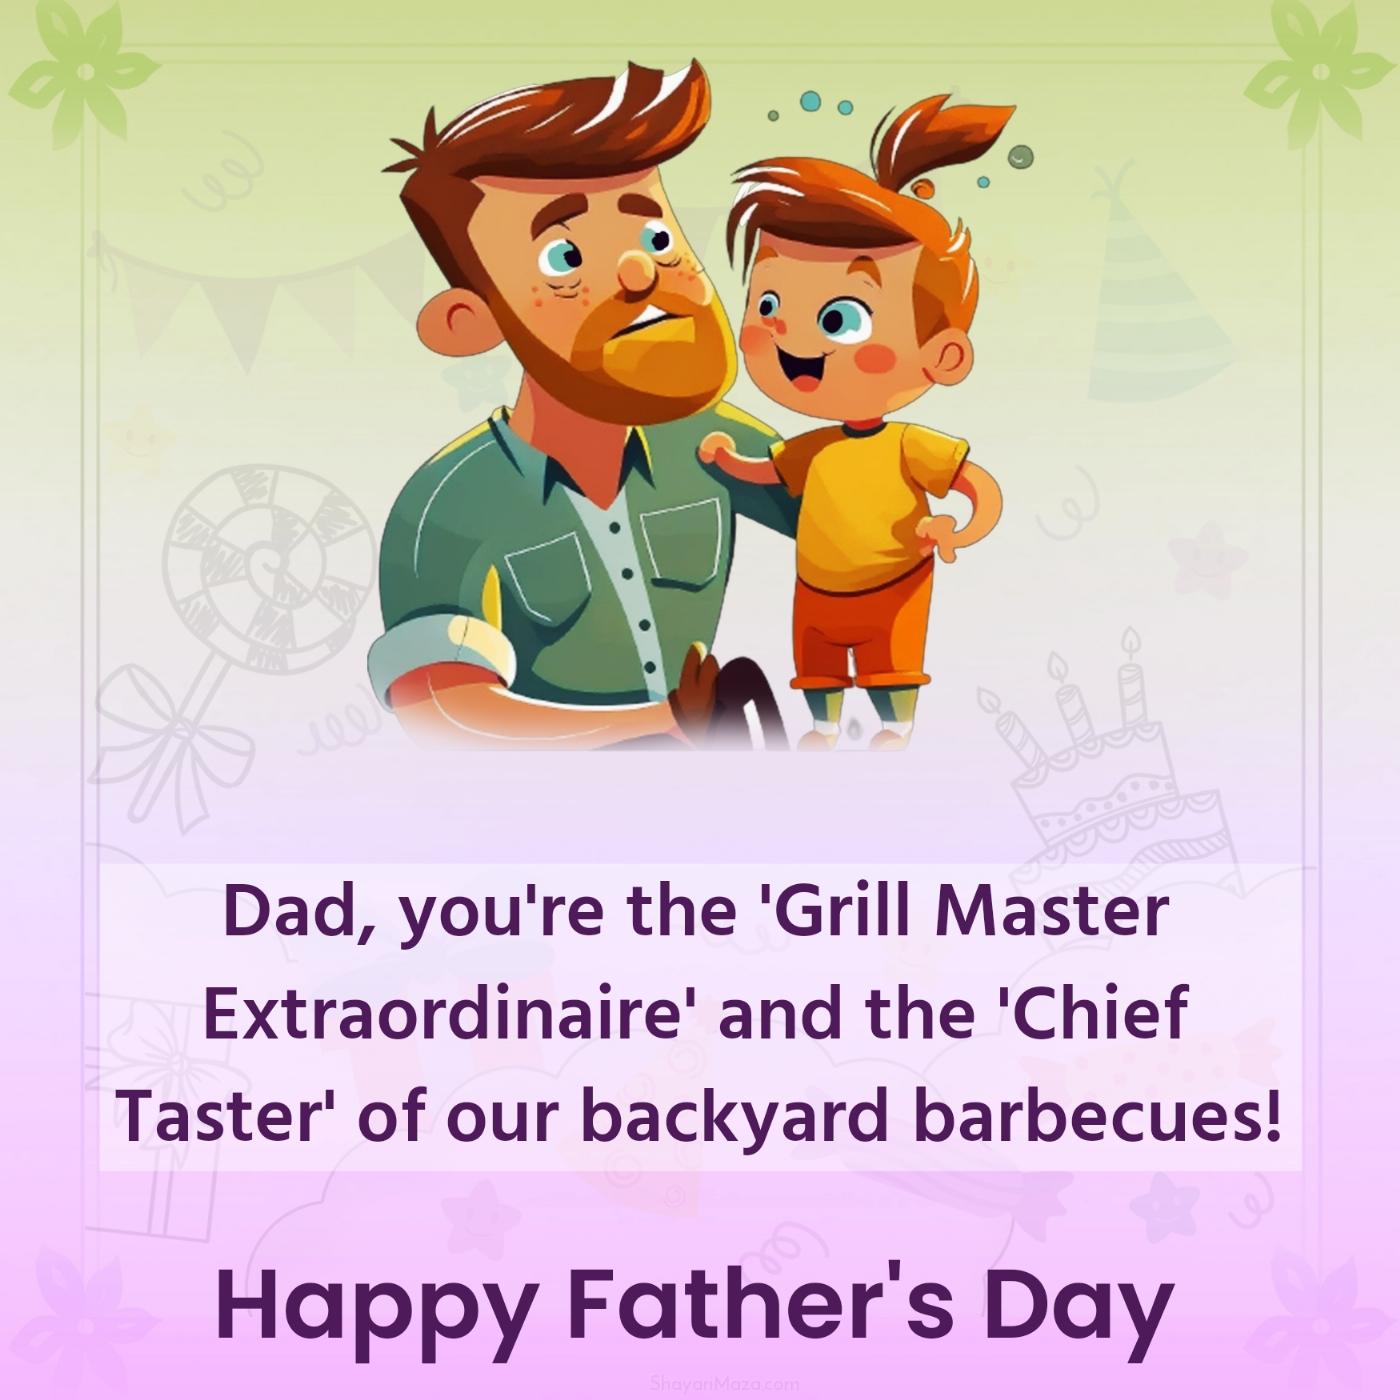 Dad you're the 'Grill Master Extraordinaire'